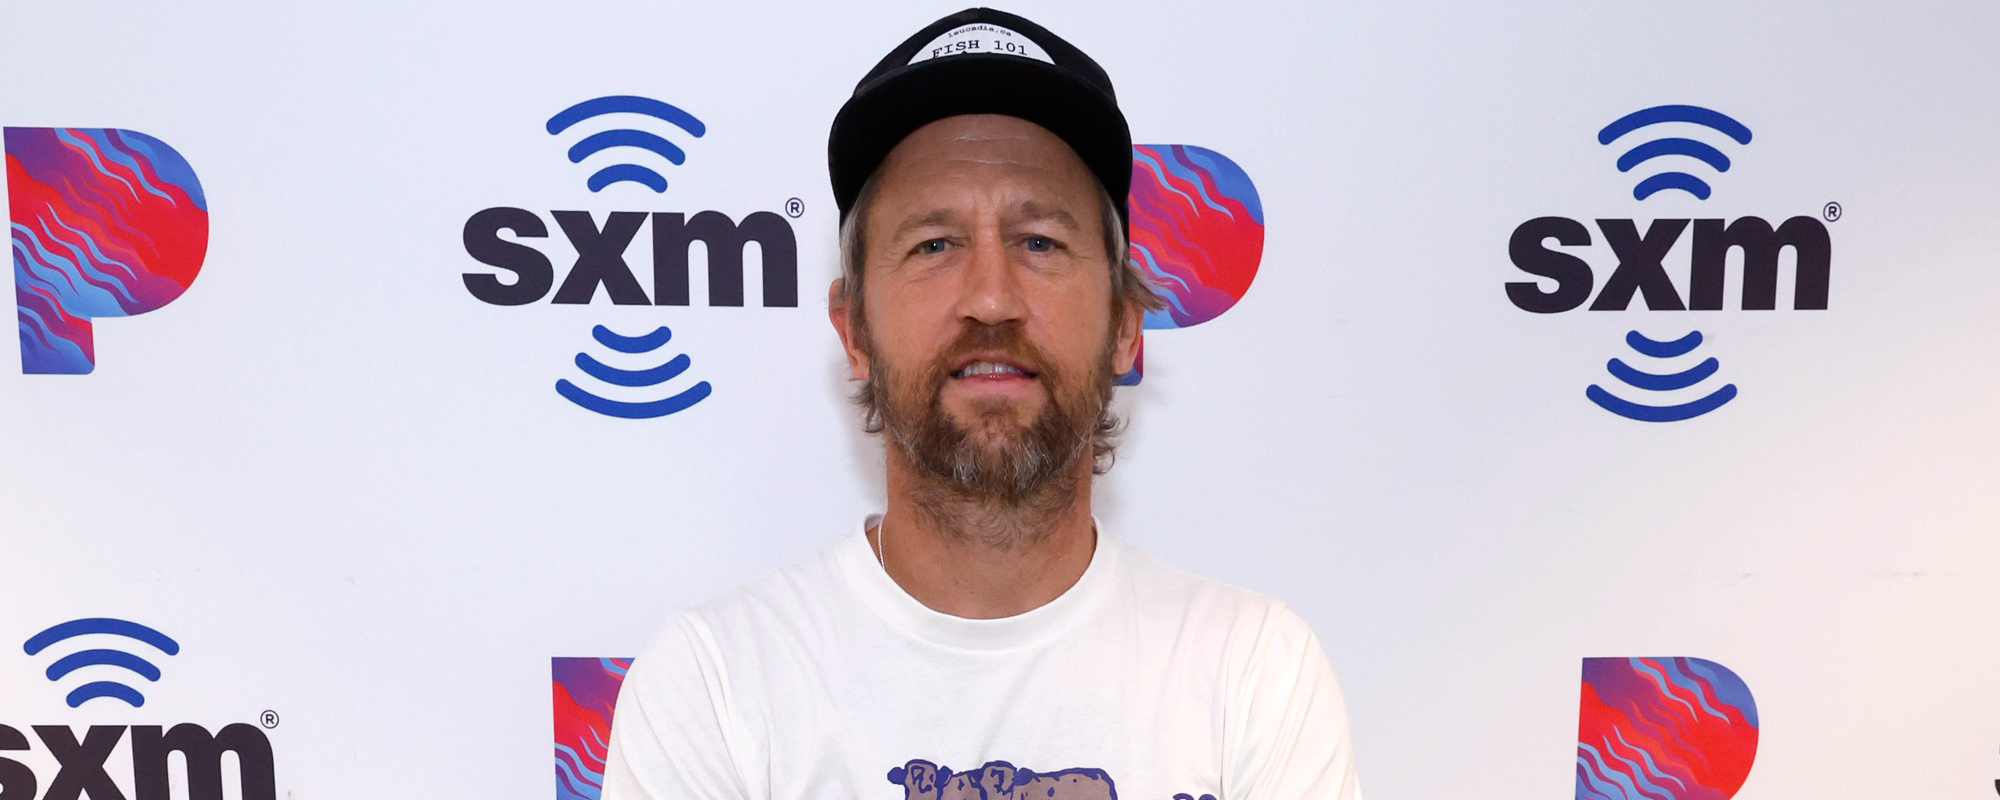 Foo Fighters’ Chris Shiflett Talks Challenges He’s Faced as a Solo Act and “Standing on the Same Piece of Wood” as Hank Williams